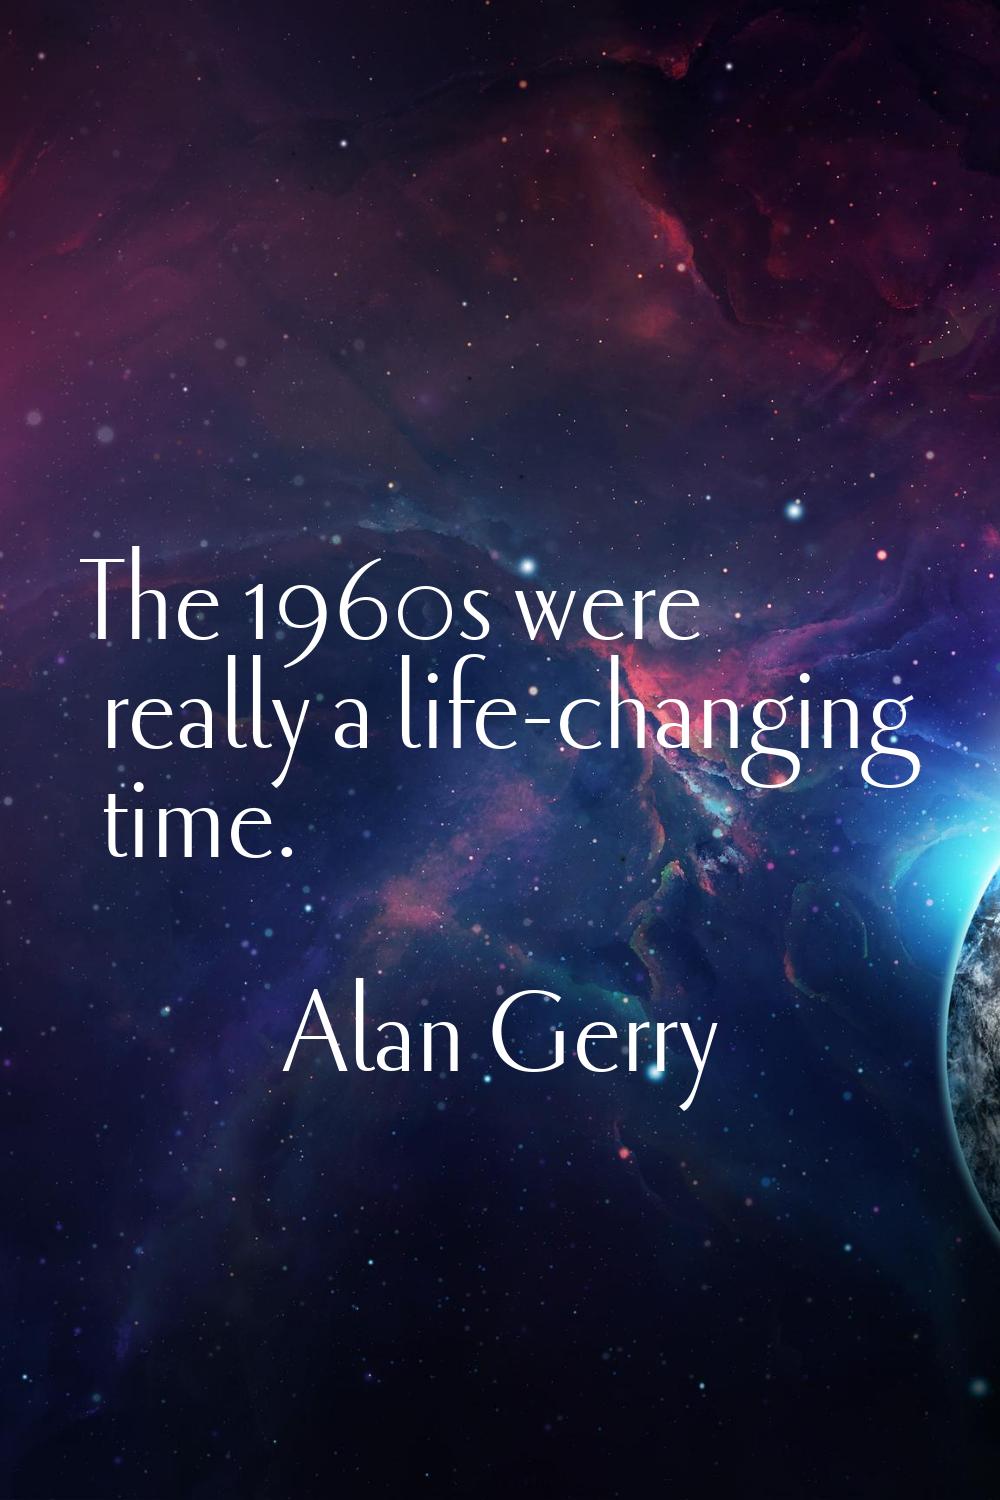 The 1960s were really a life-changing time.